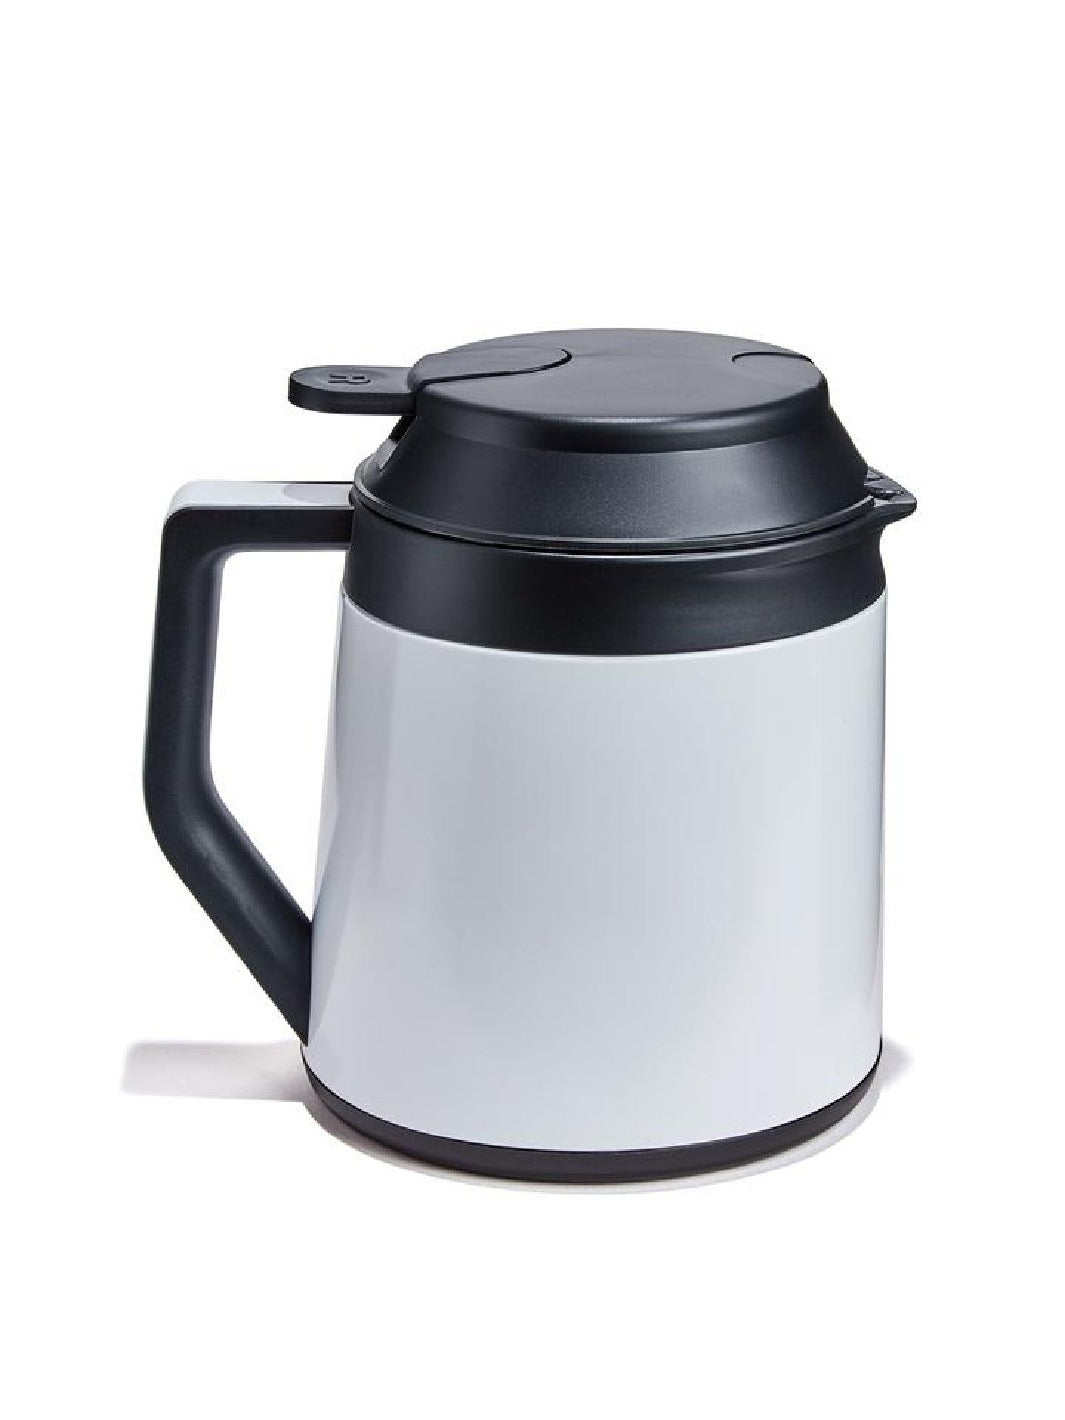 RATIO Six Thermal Carafe and Lid